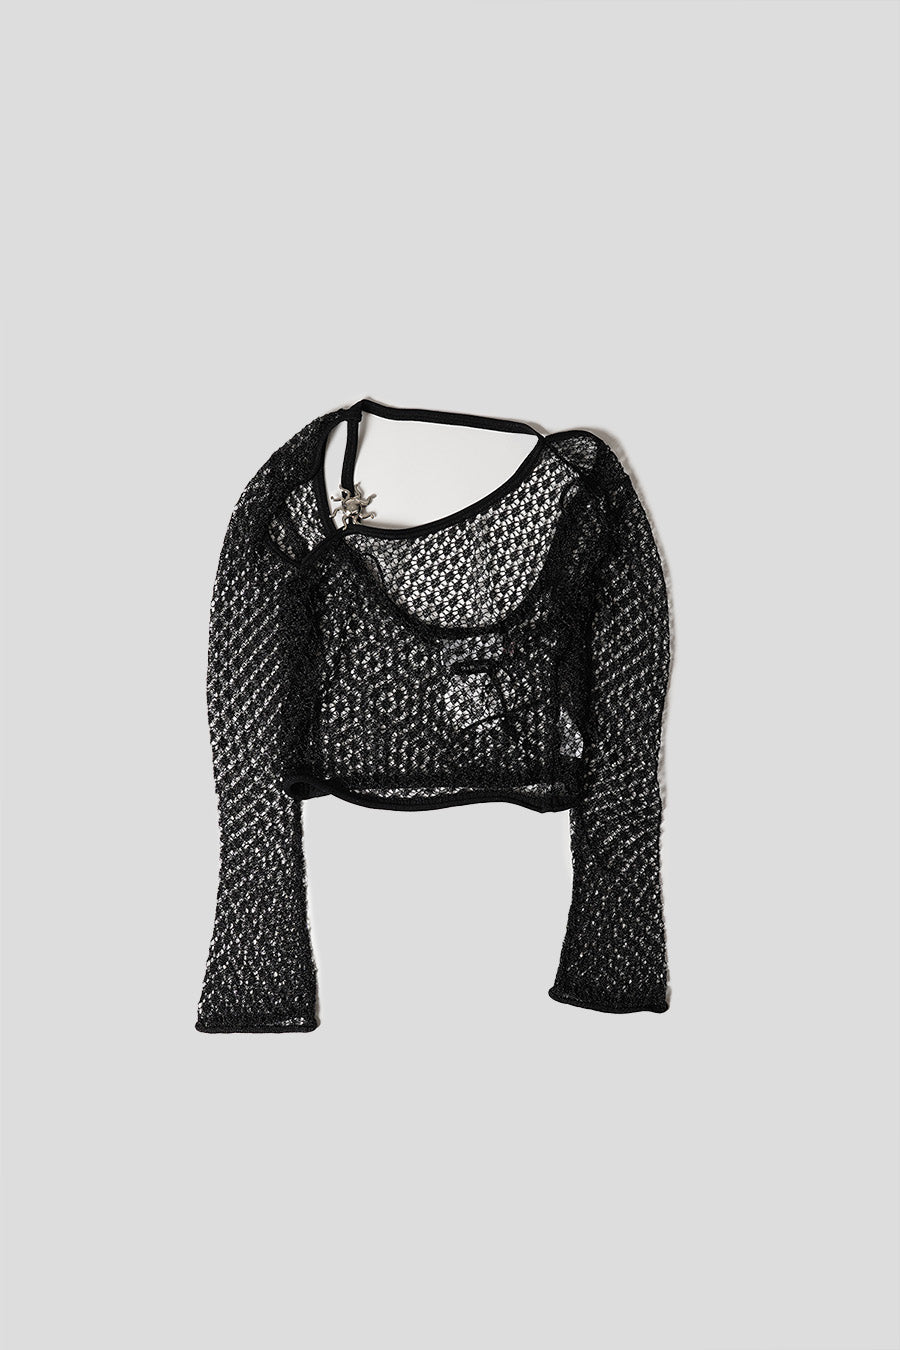 house of sunny - LACE TOP WITH BLACK SUNDIAL - LE LABO STORE